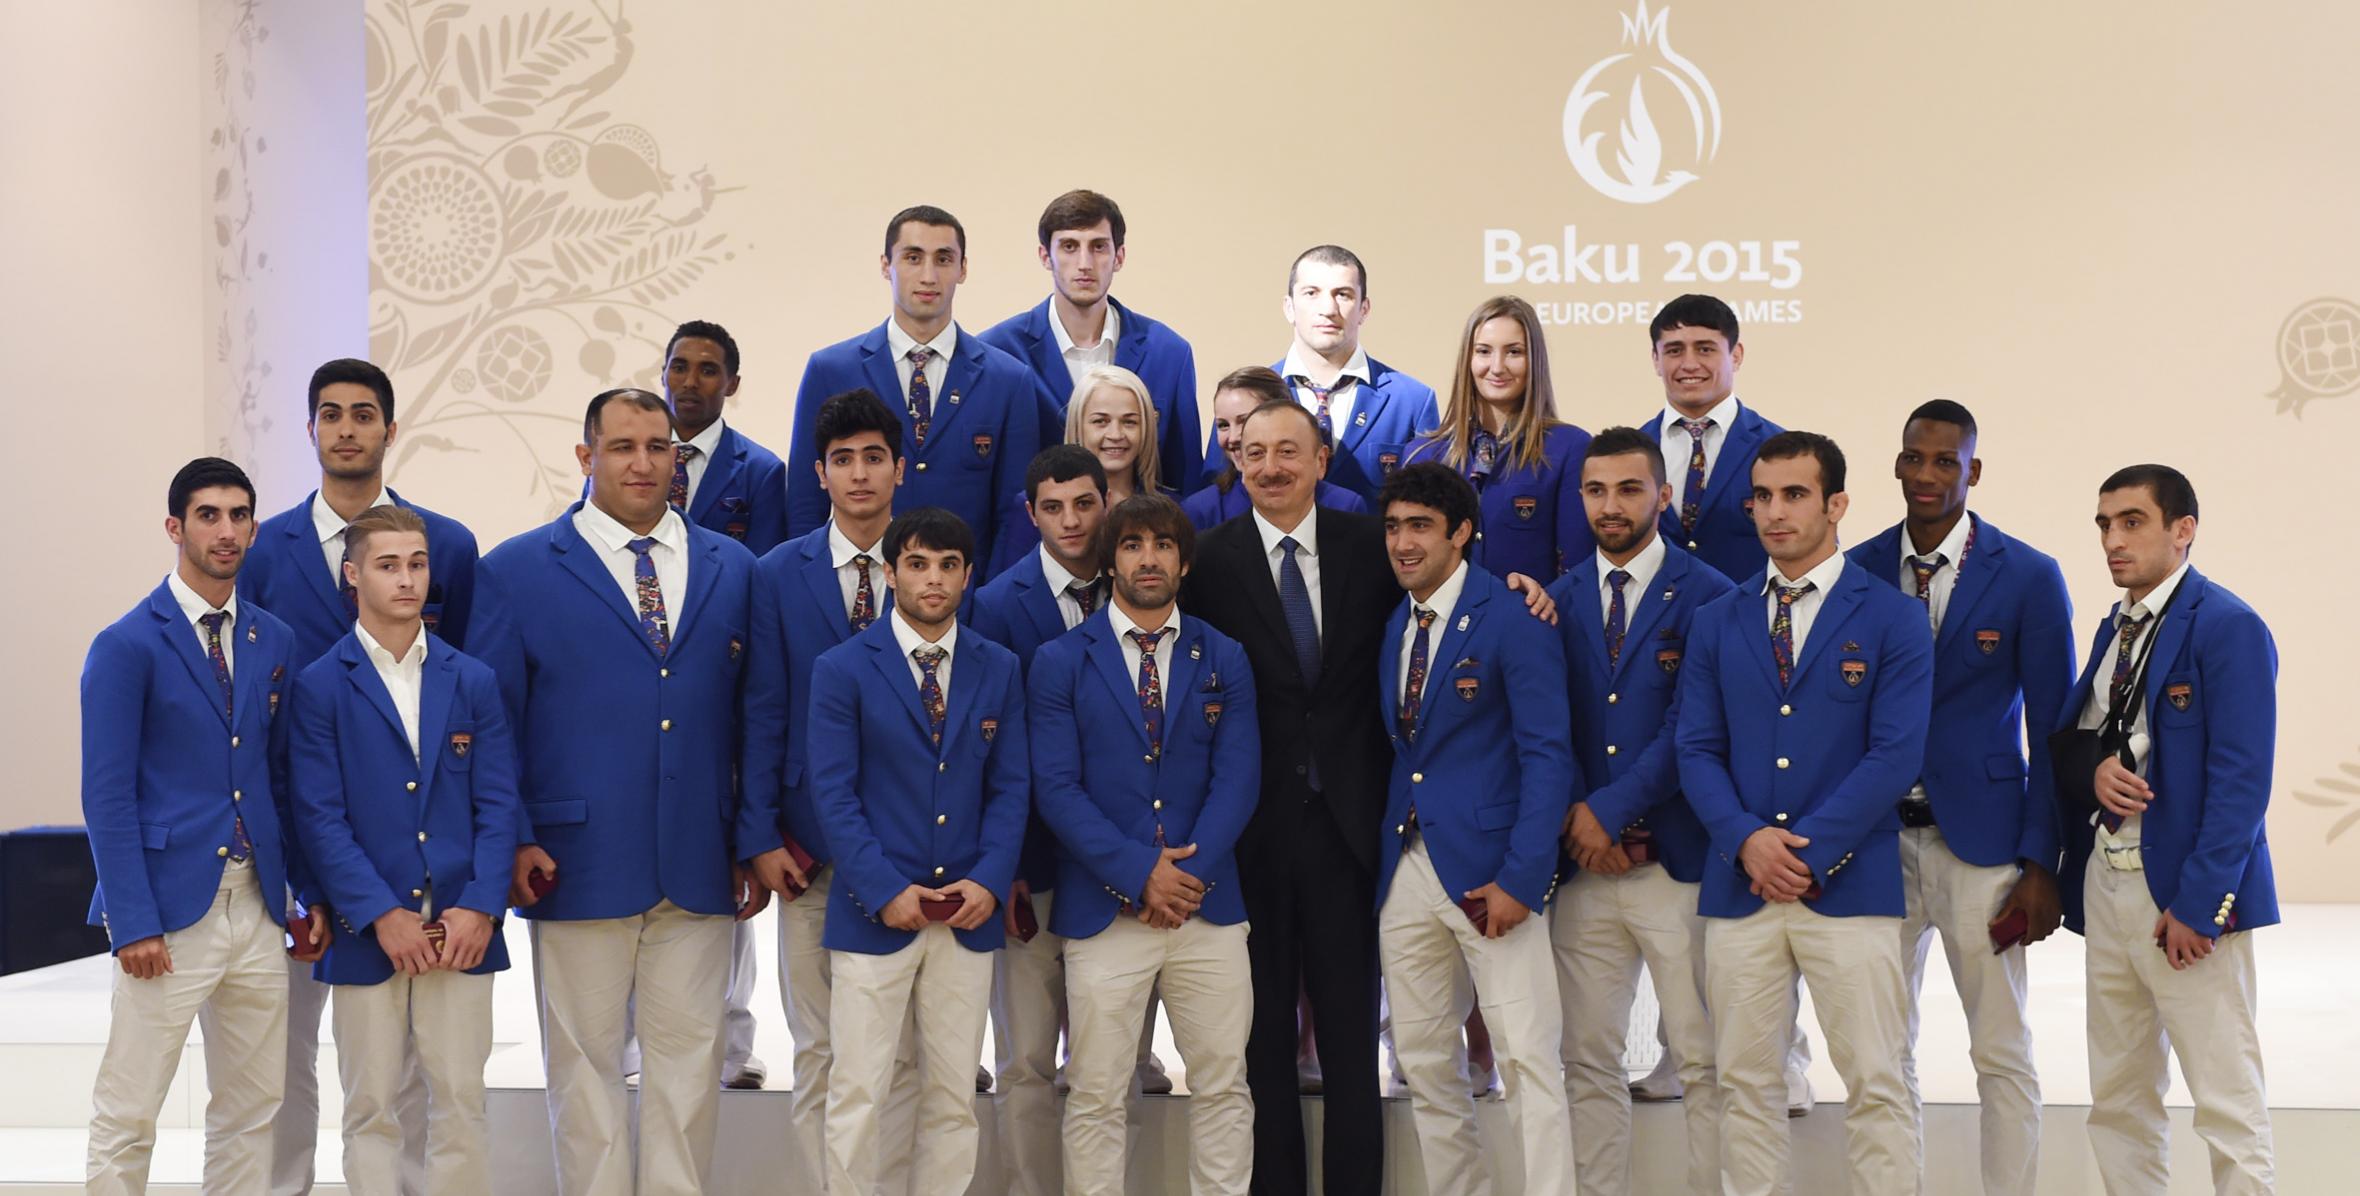 Ilham Aliyev attended the award ceremony on the occasion of the First European Games